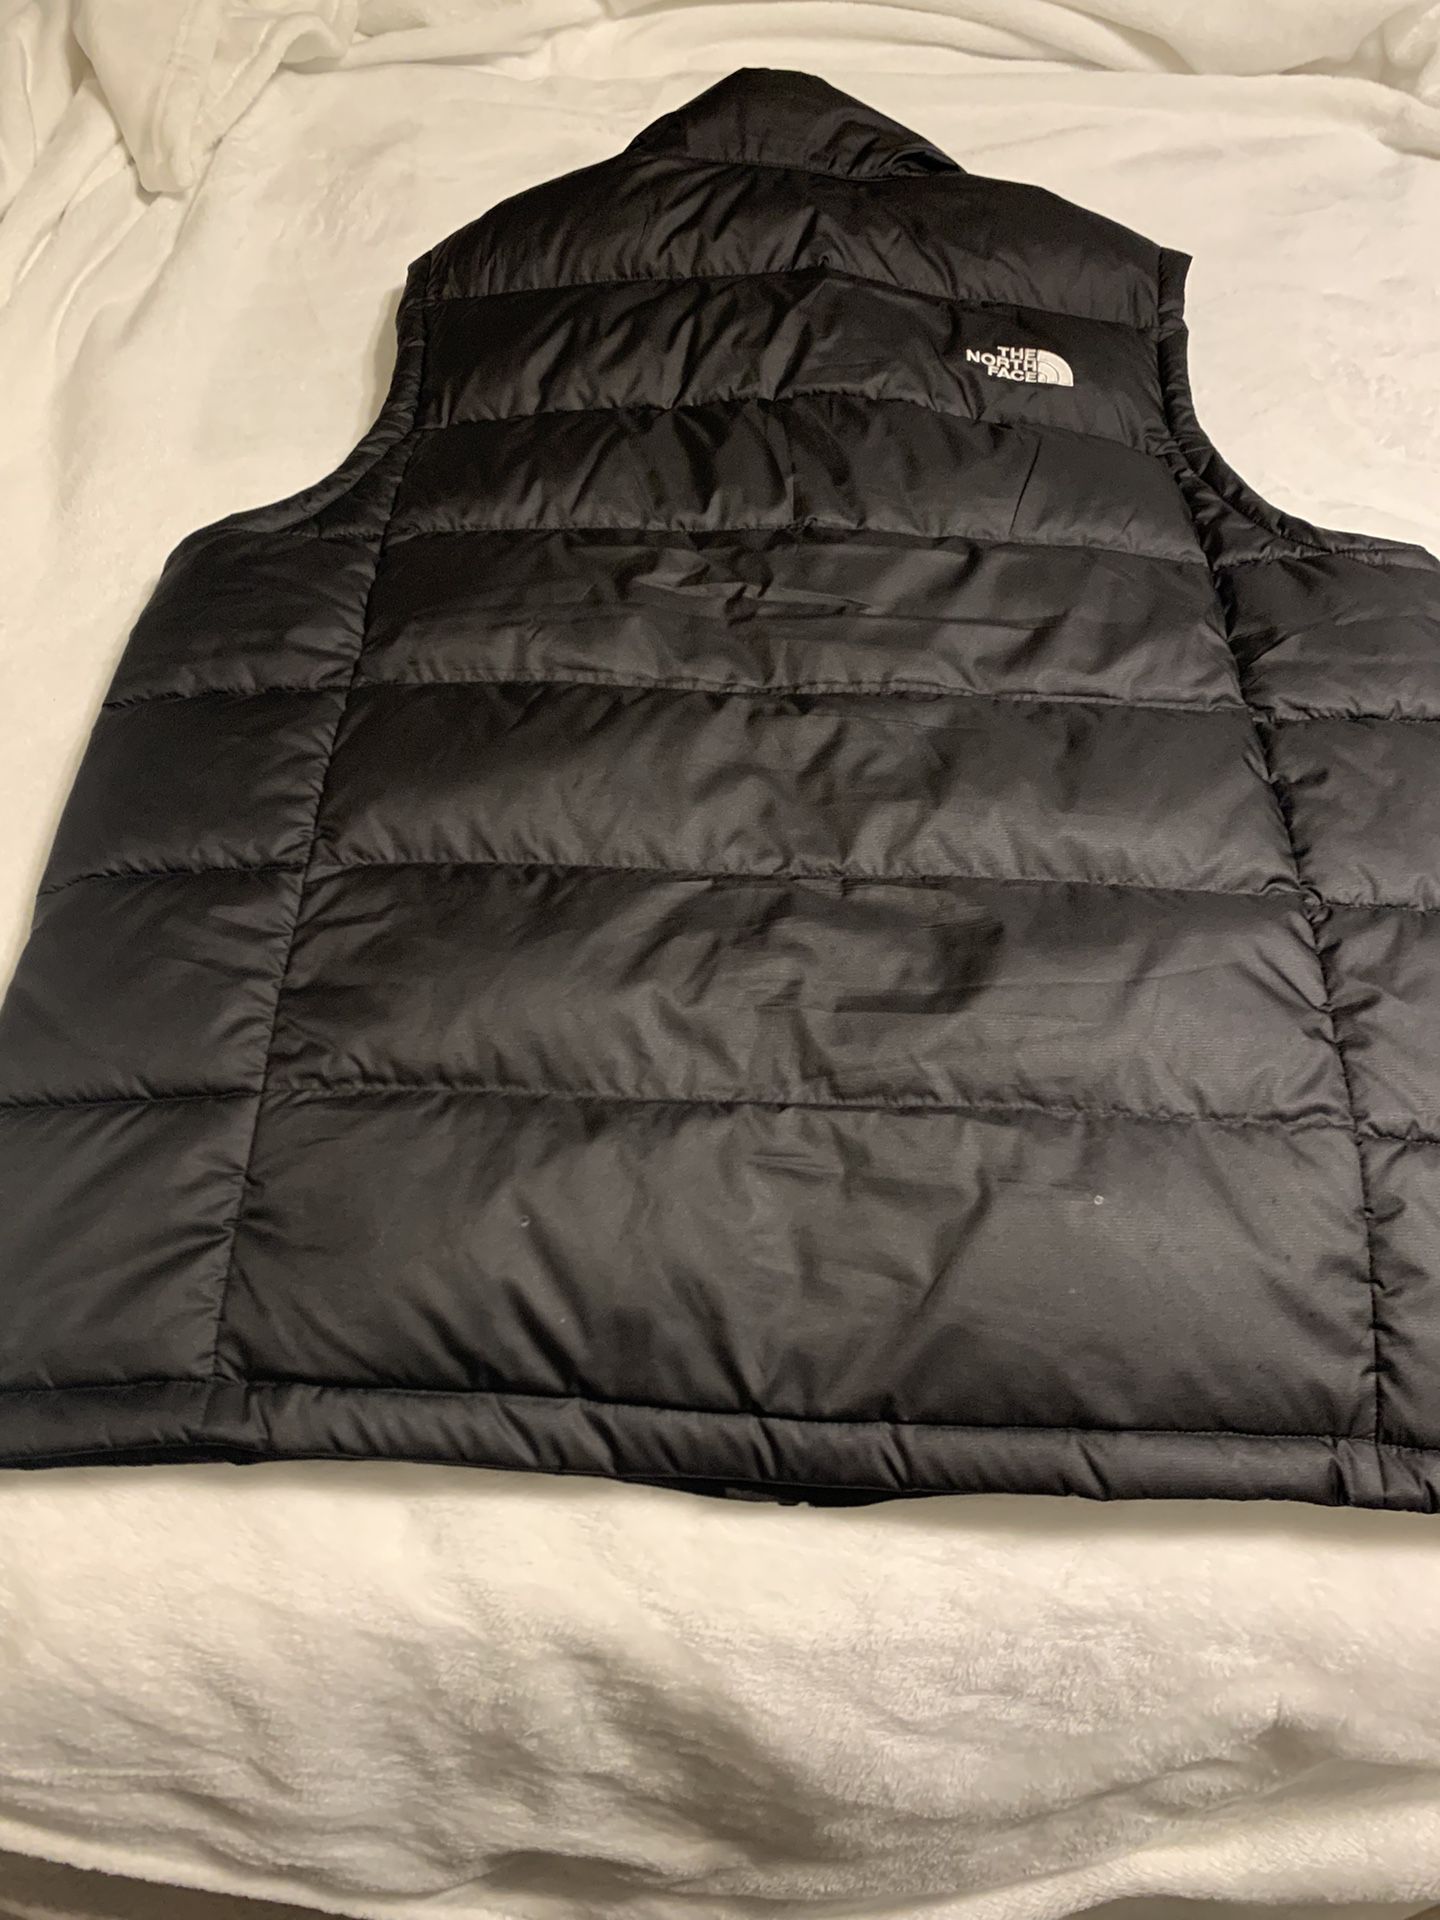 North face puffer/vest